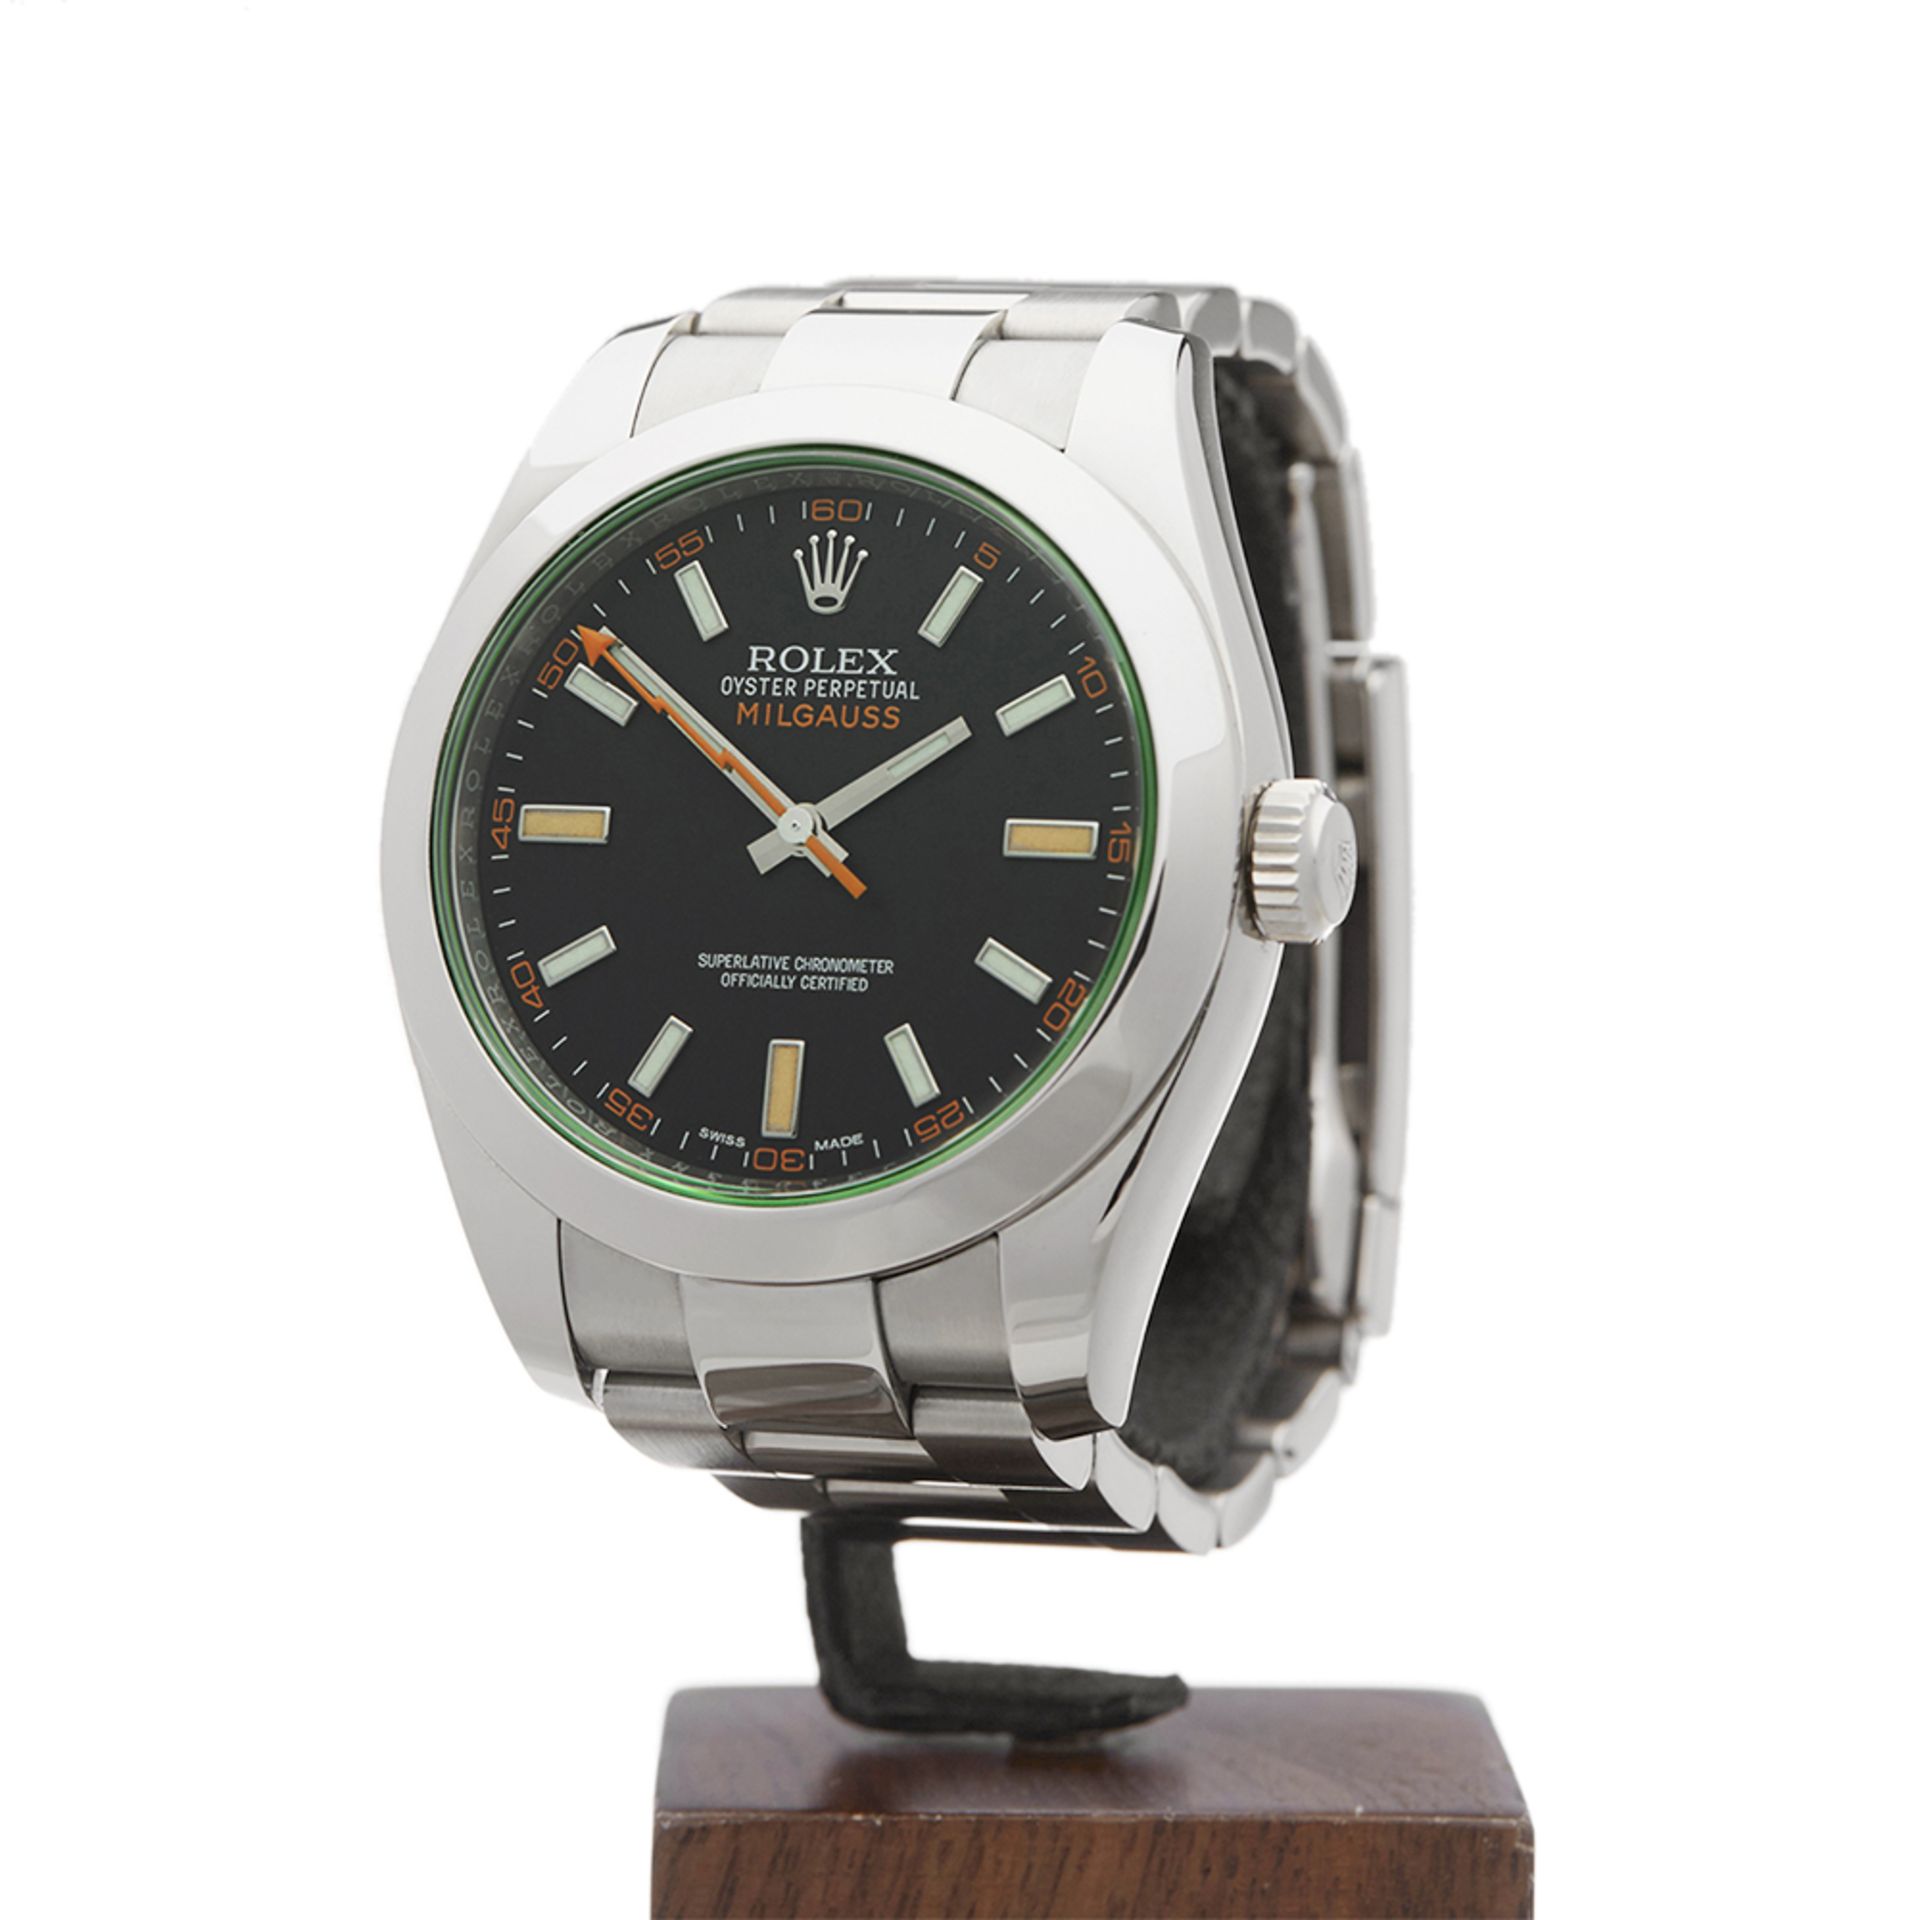 Rolex, Milgauss Green Glass 40mm Stainless Steel 116400GV - Image 3 of 9